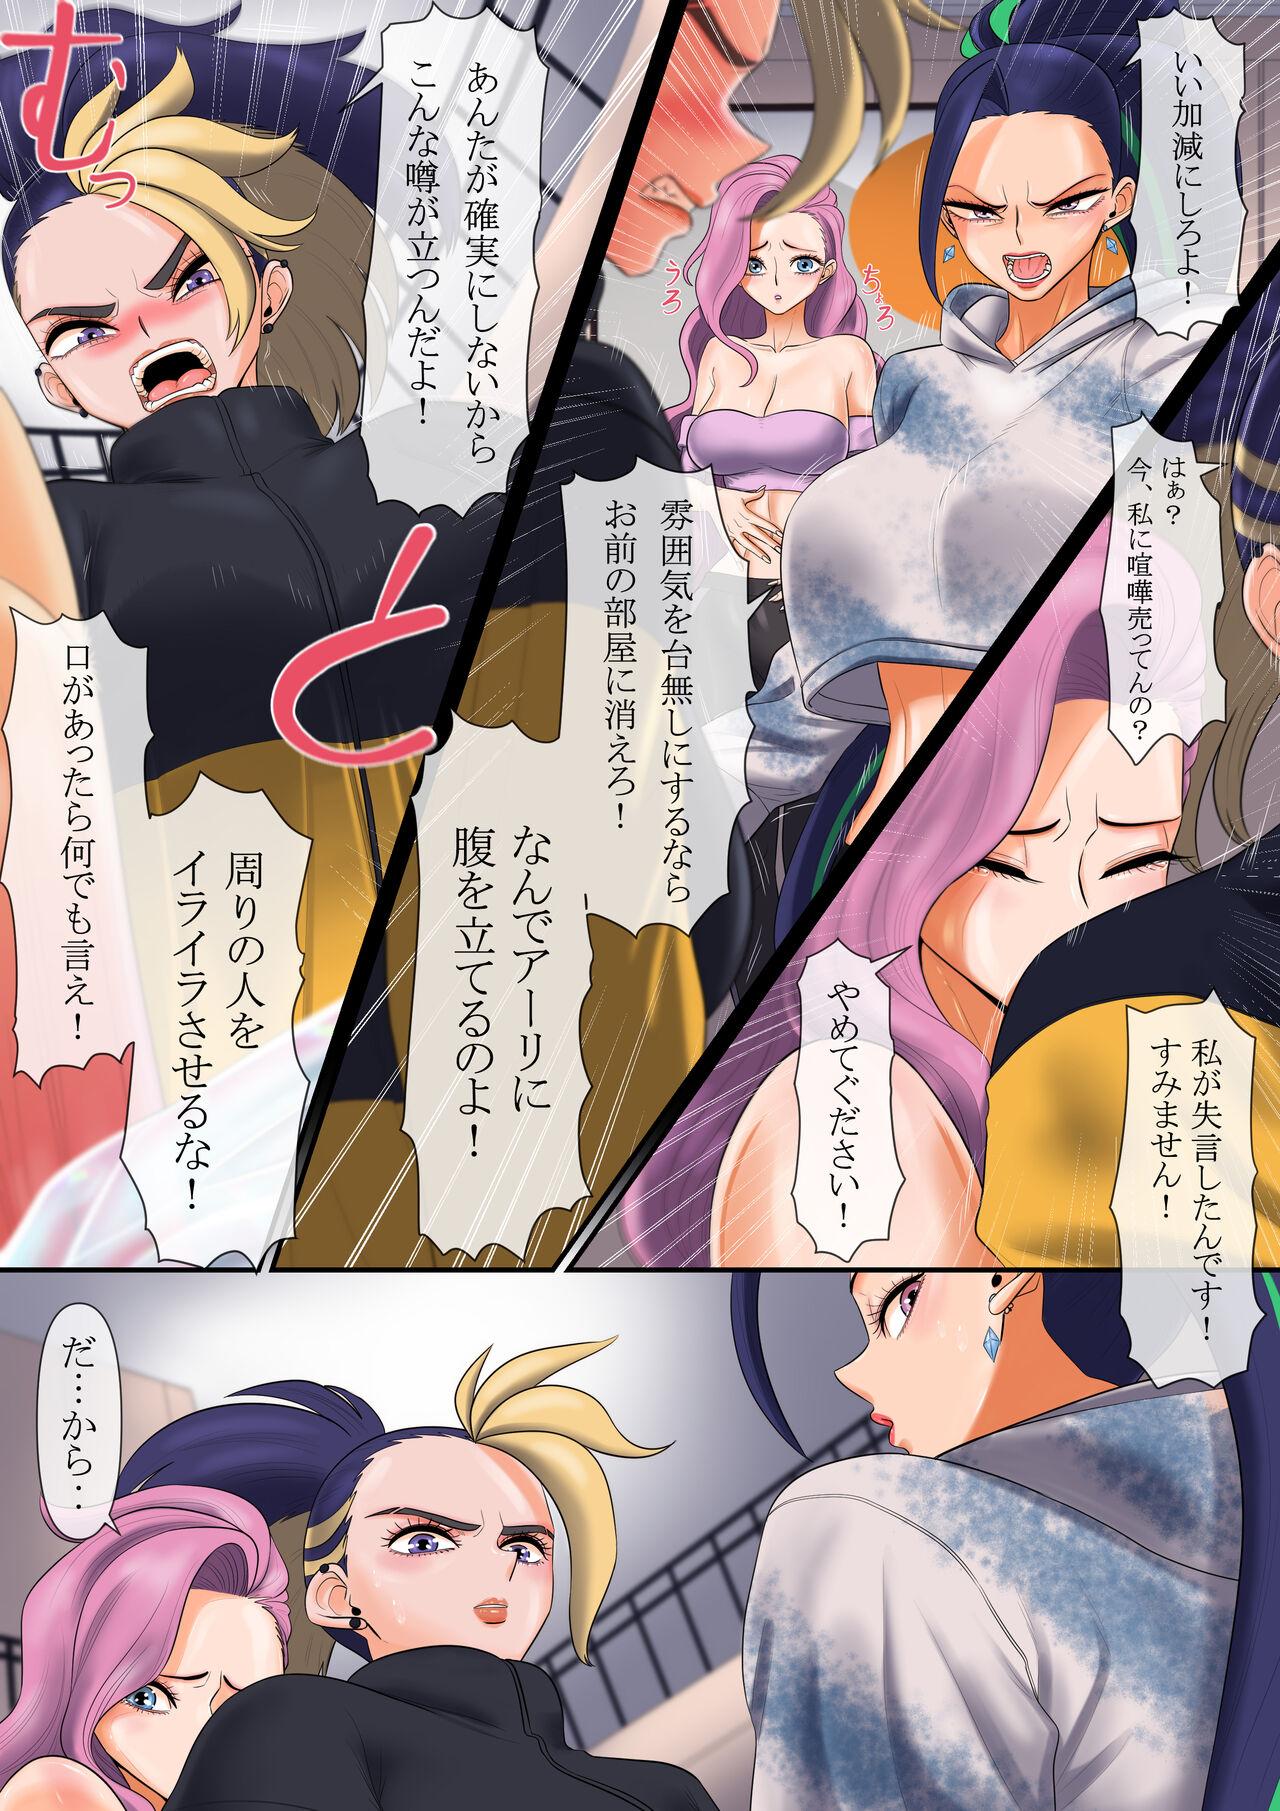 Milfsex 守りたいもの... - League of legends Close Up - Page 5